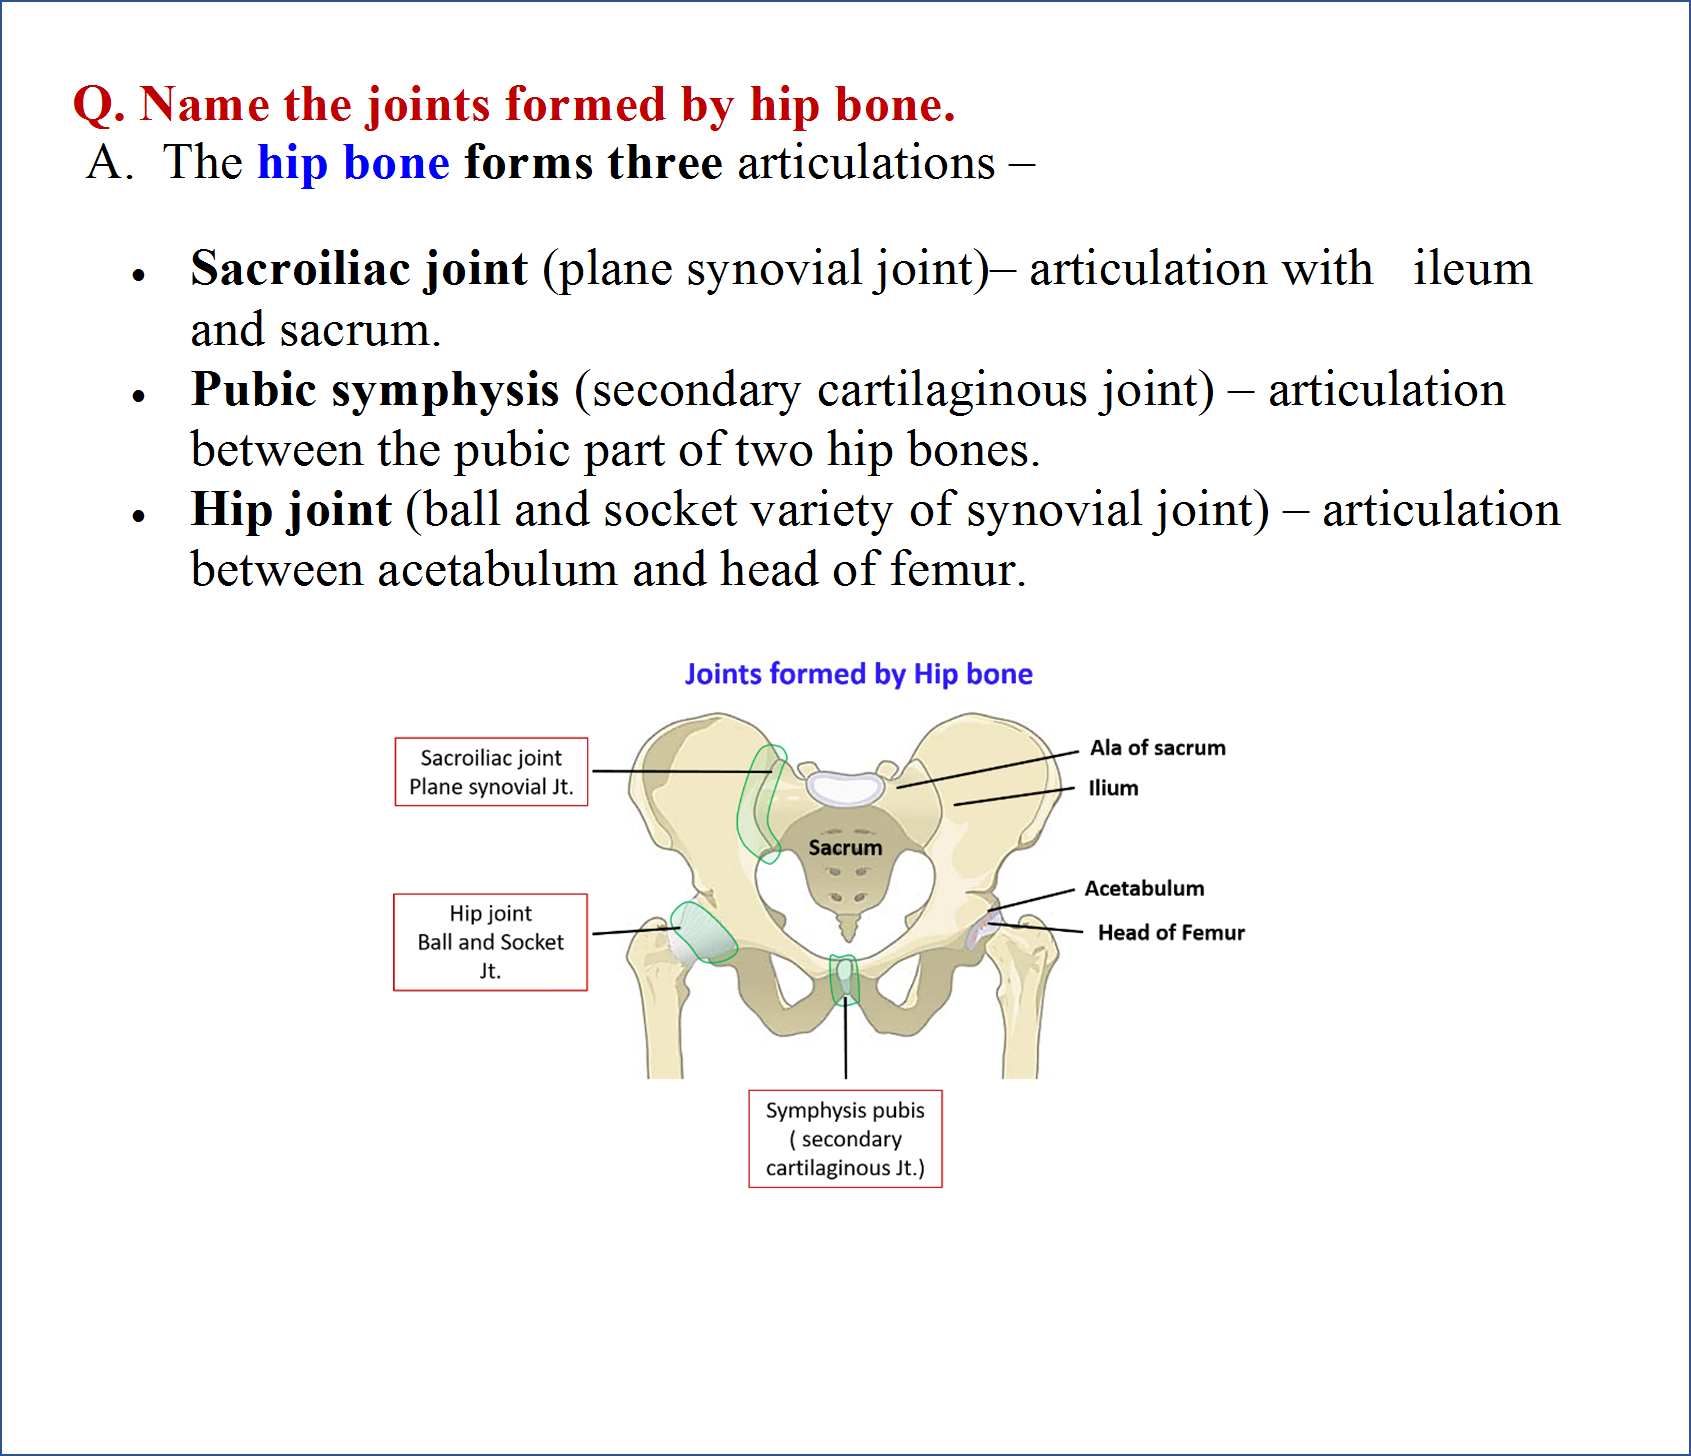 joints formed by hip bone